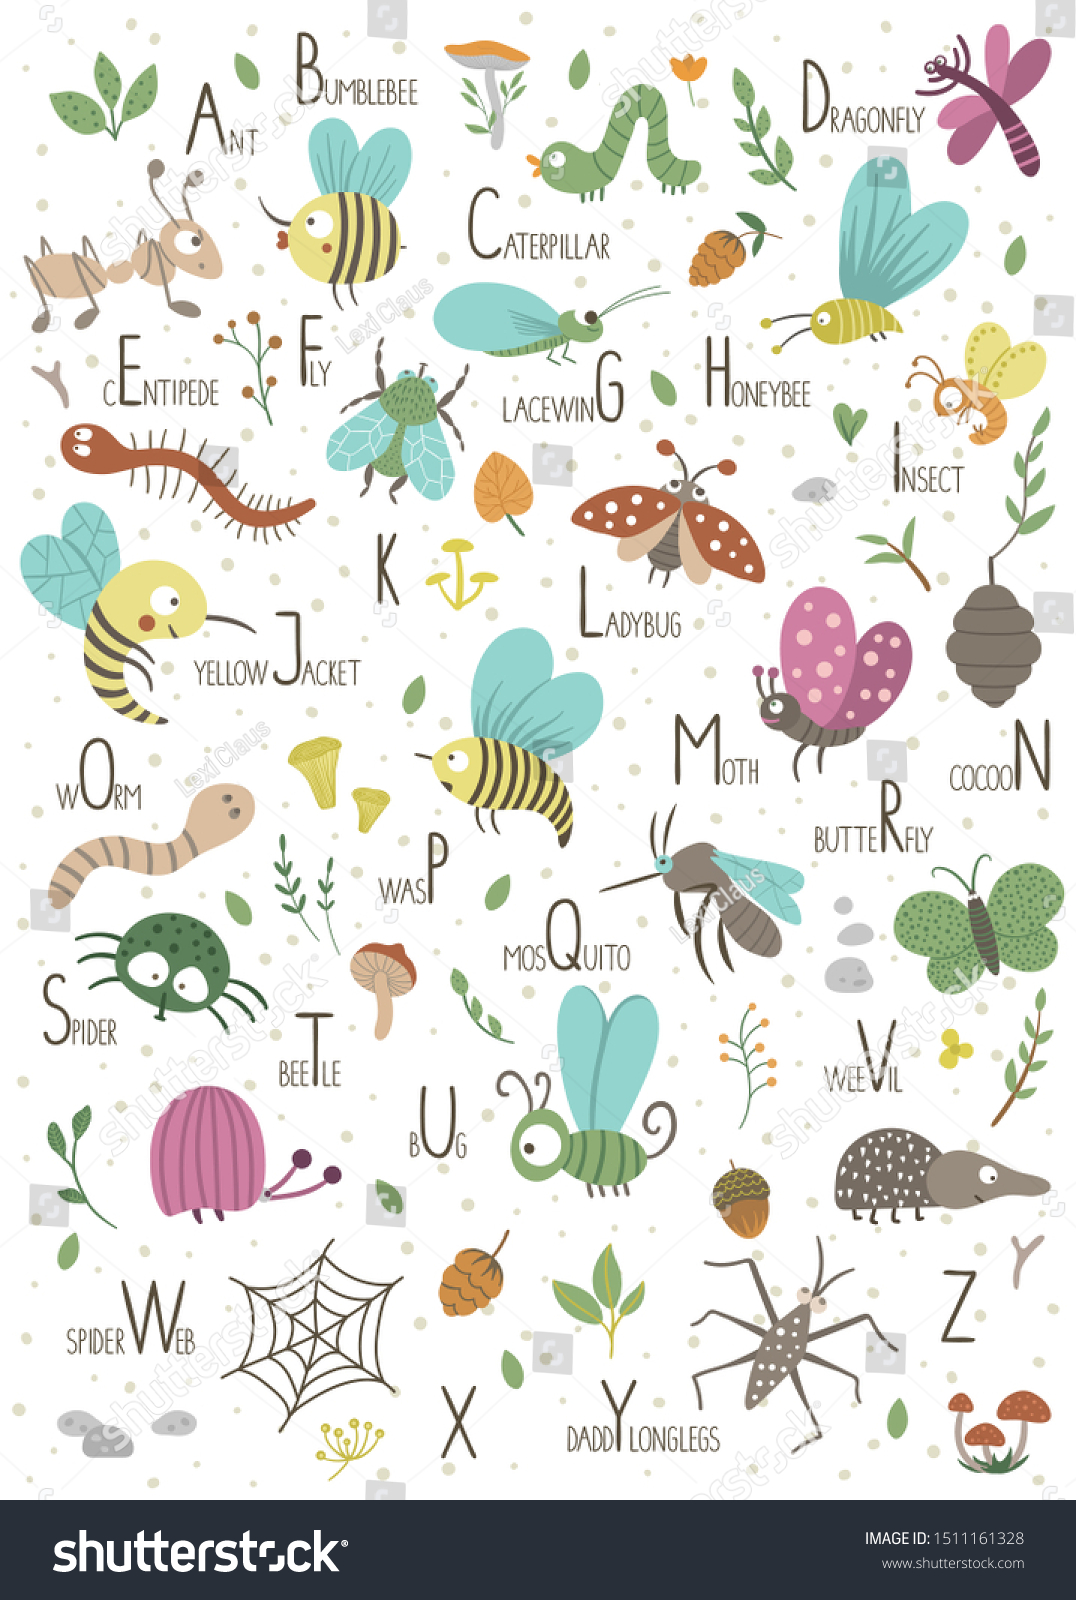 A-Z Insect Alphabet Poster 8x10 Digital Download INSTANT DOWNLOAD